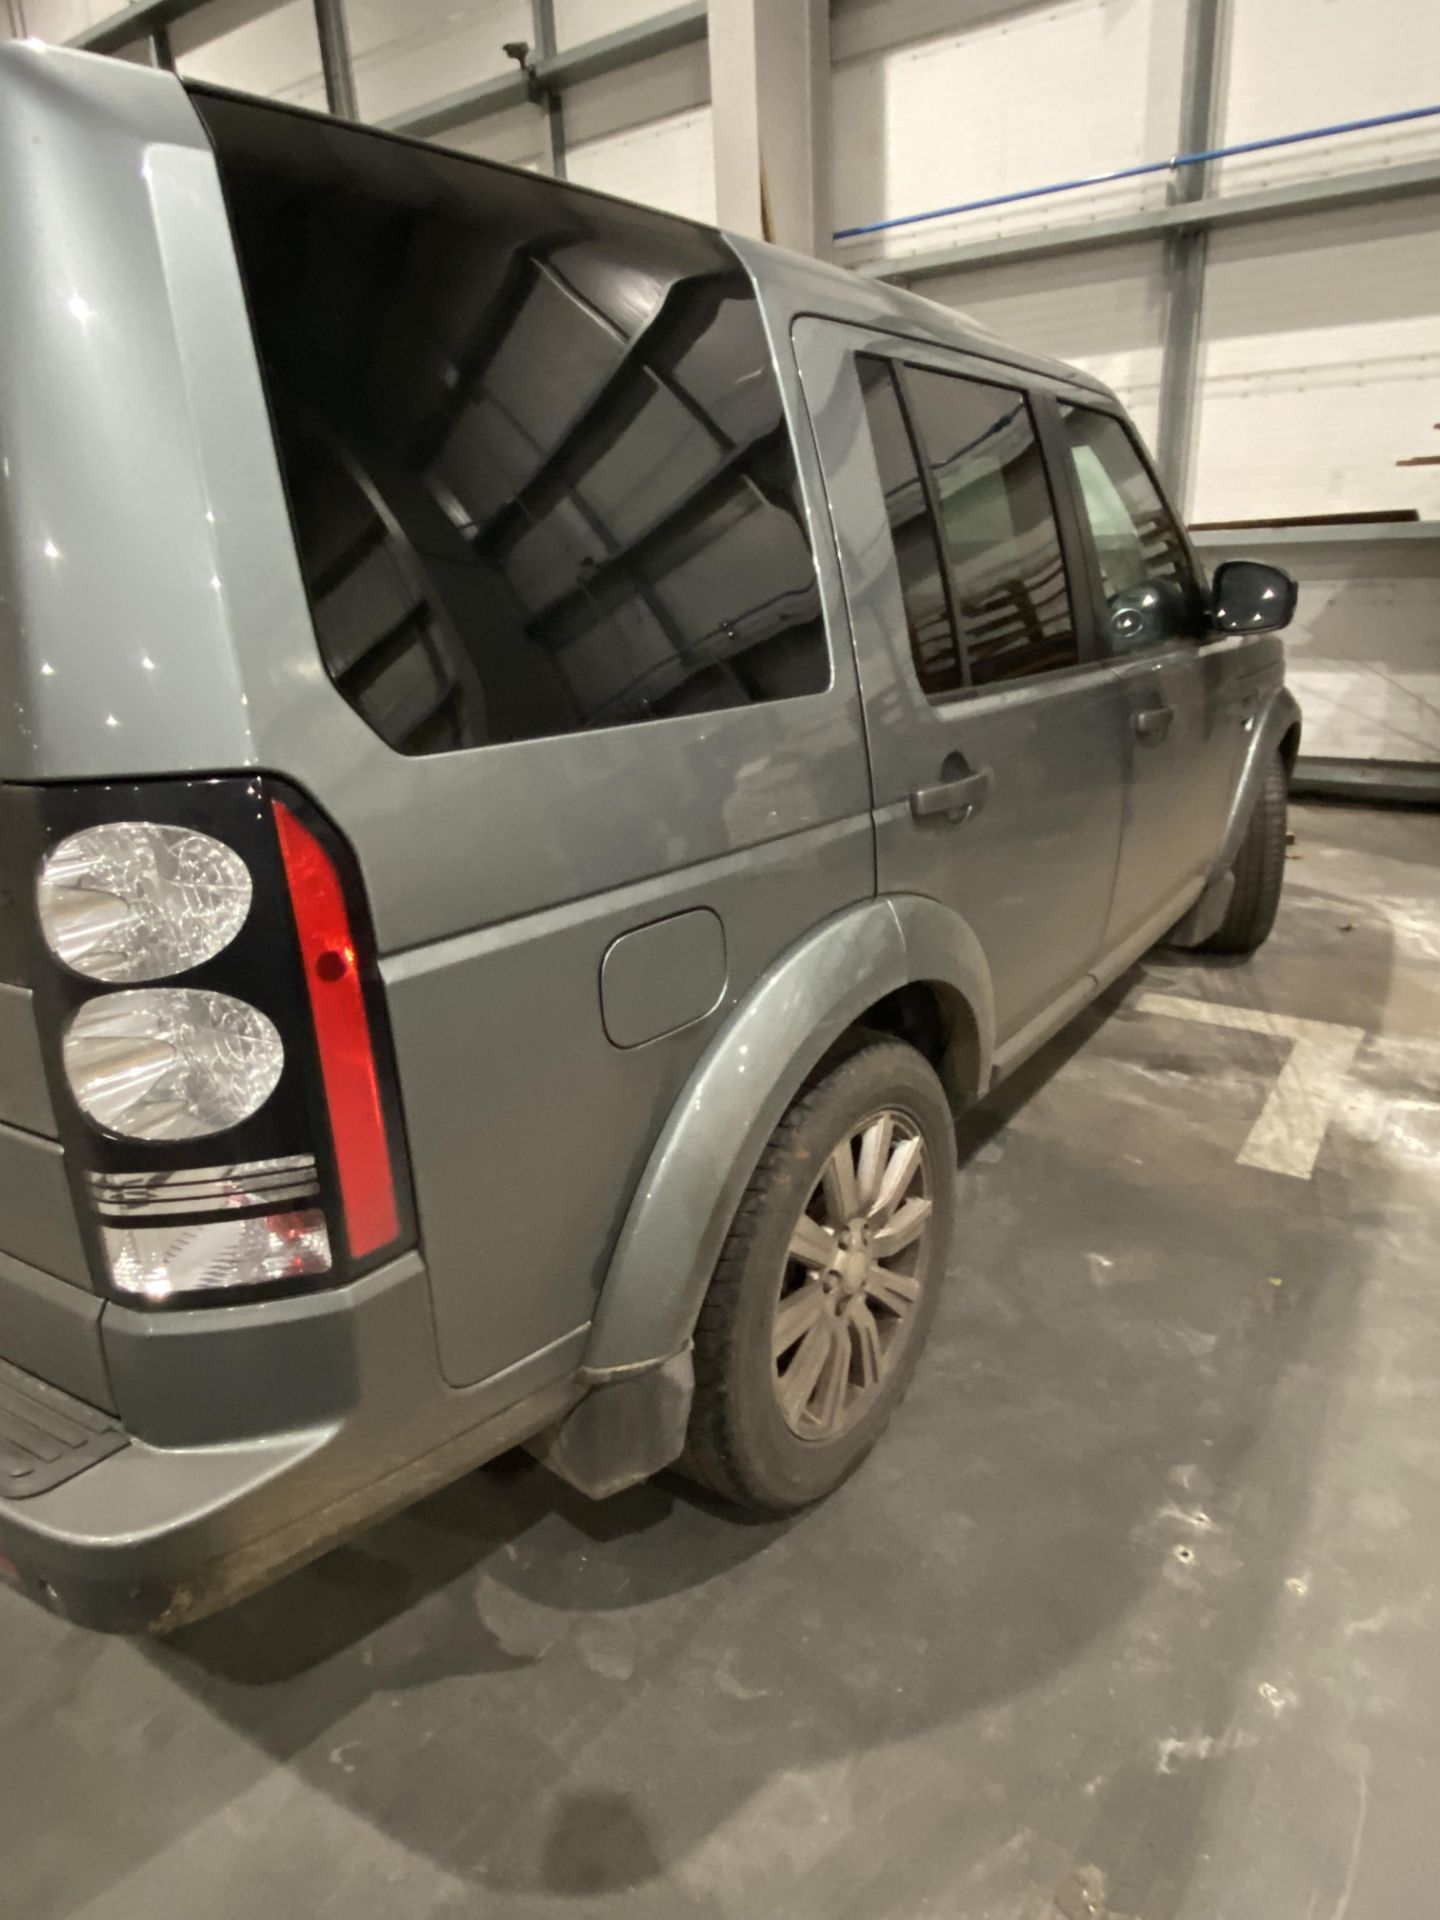 Land Rover Discovery XS SDV8 Auto - Image 7 of 15